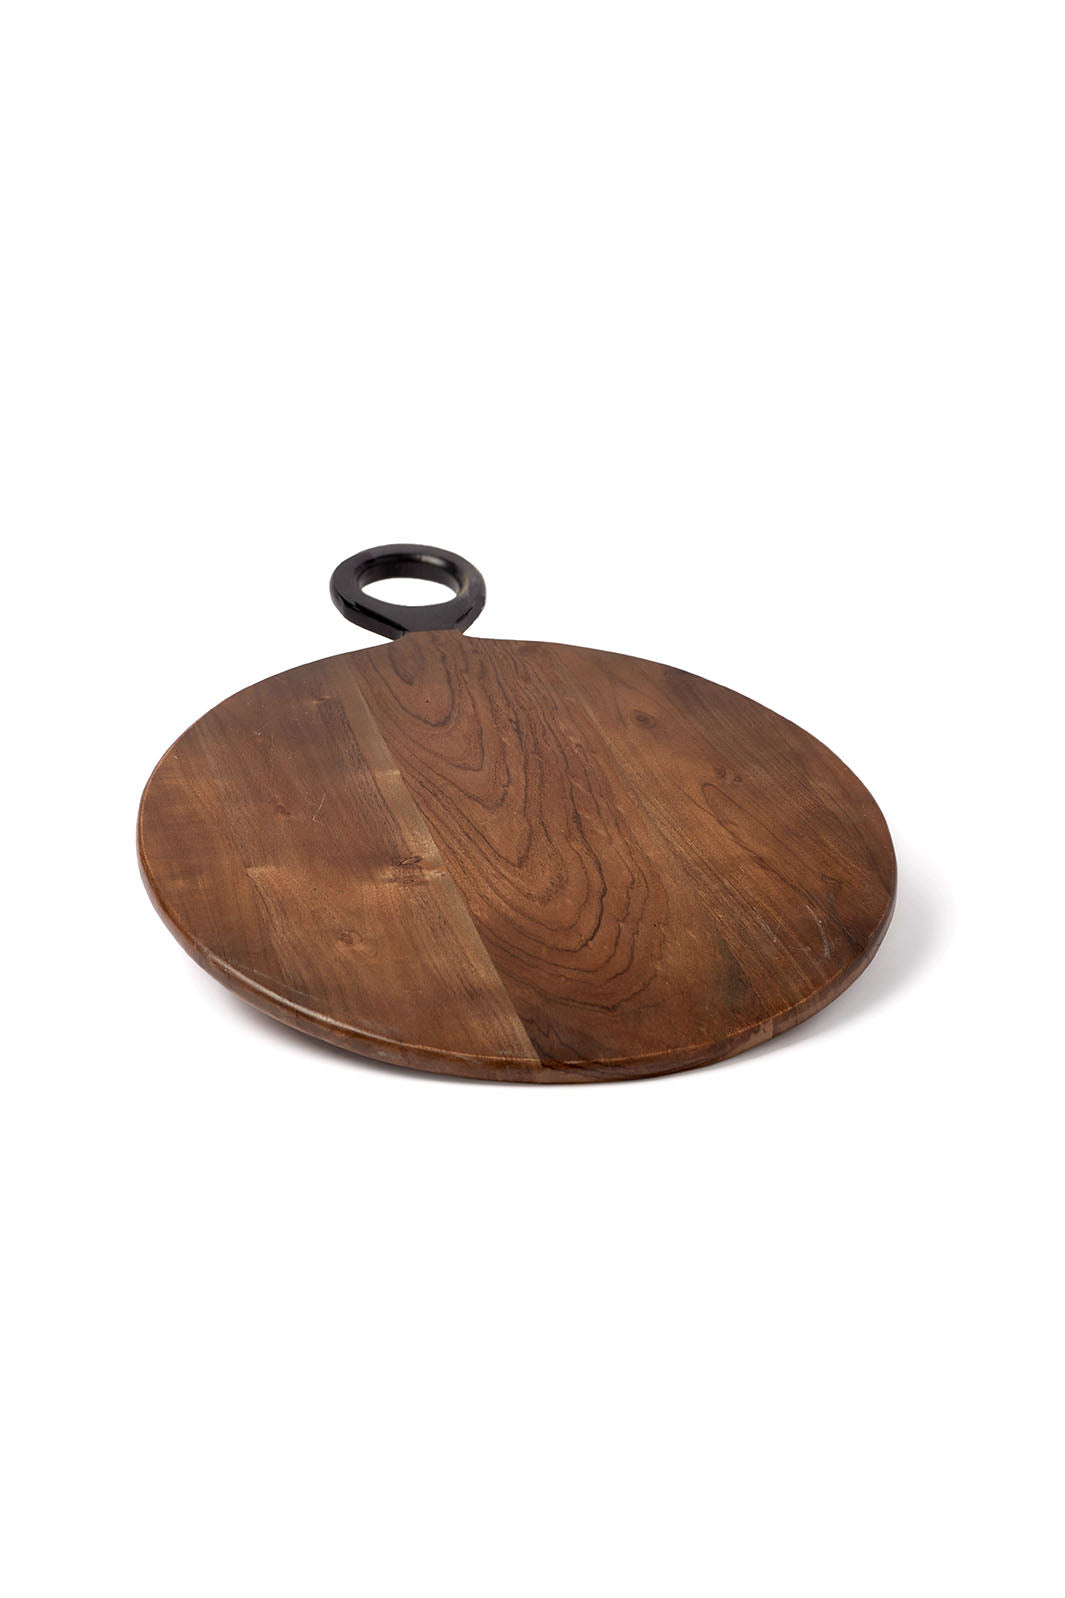 Acacia Round Serving Board with Handle, 17.7"